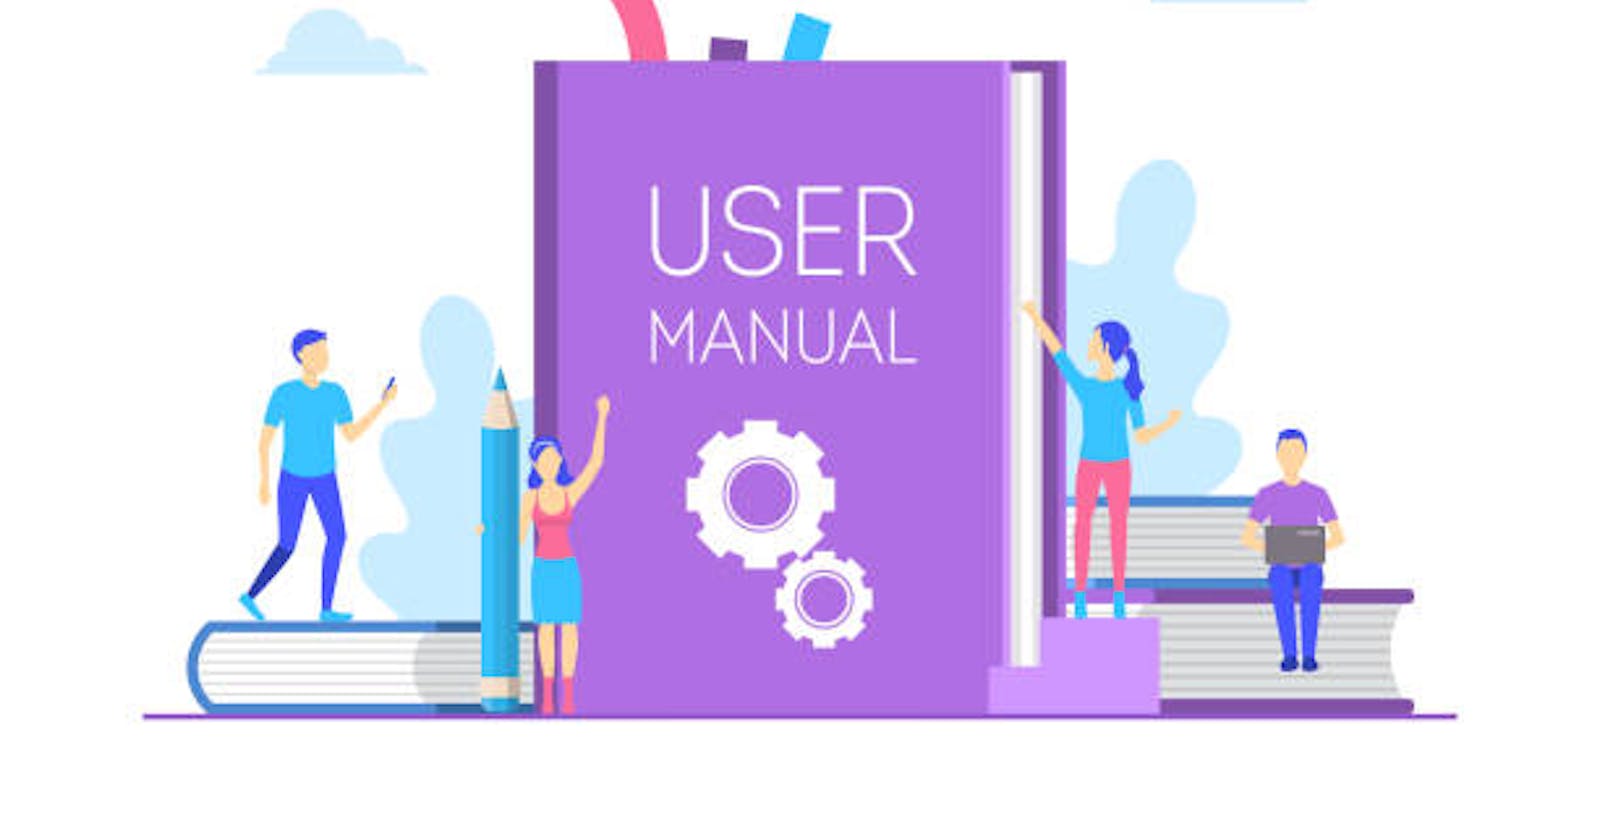 5 Common Mistakes to avoid when writing user manuals